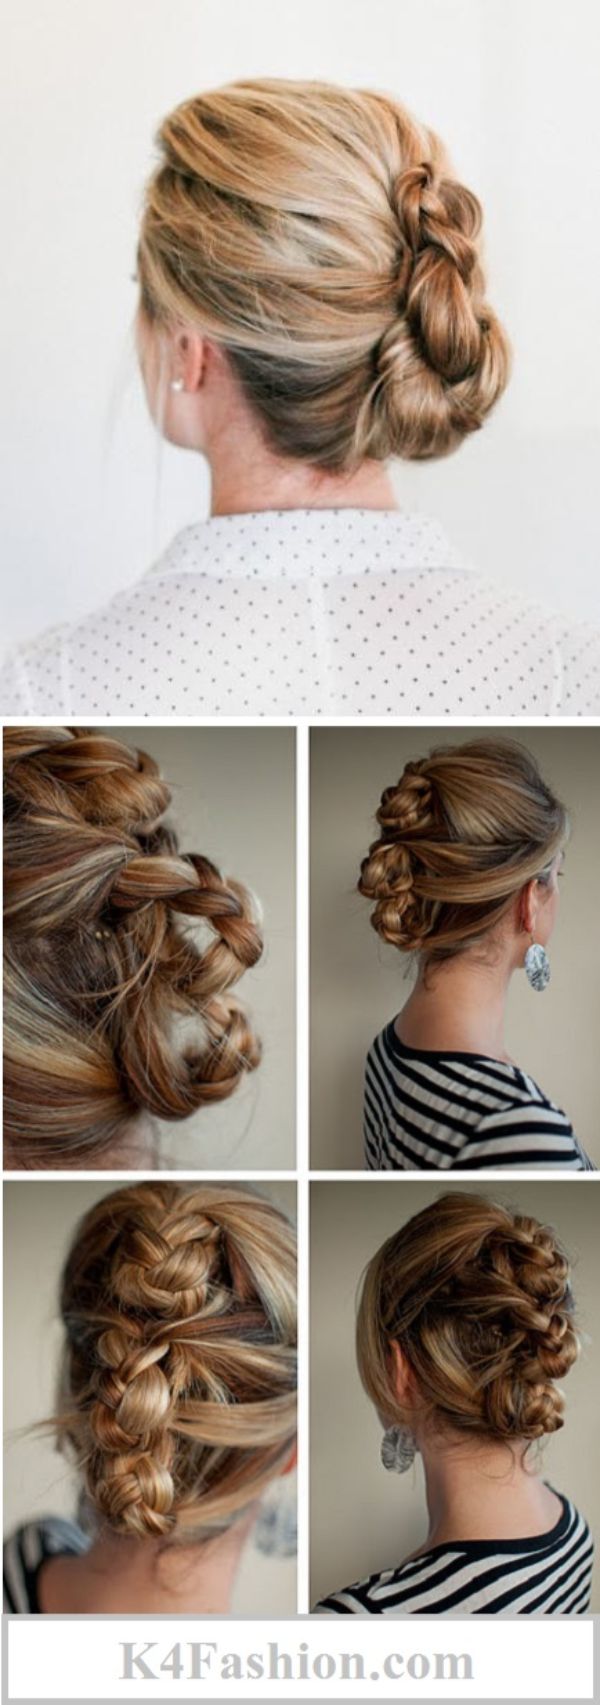 15 Simple Hairstyles For A Strict Dress Code - K4 Fashion